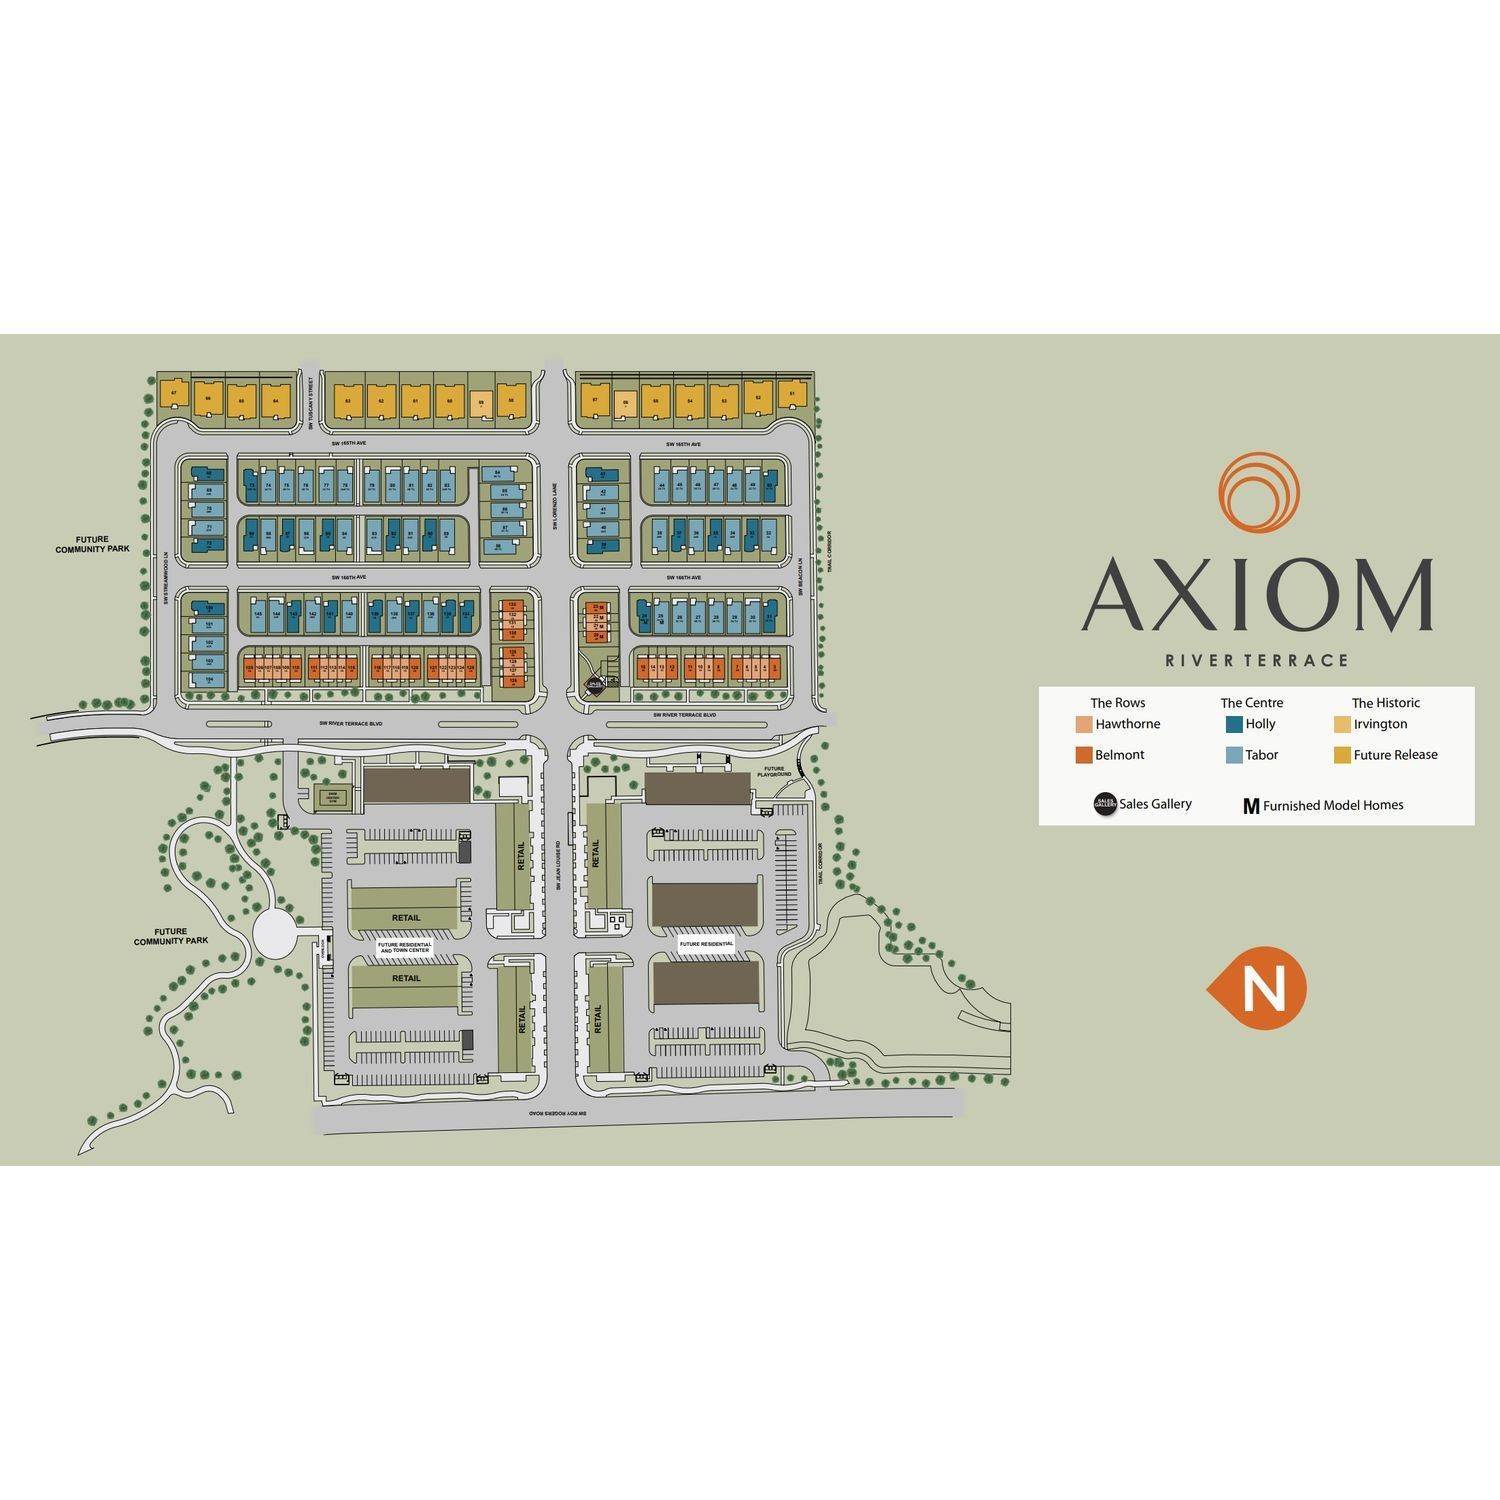 The Centre at Axiom building at 16692 SW Jean Louise Rd, Tigard, OR 97223